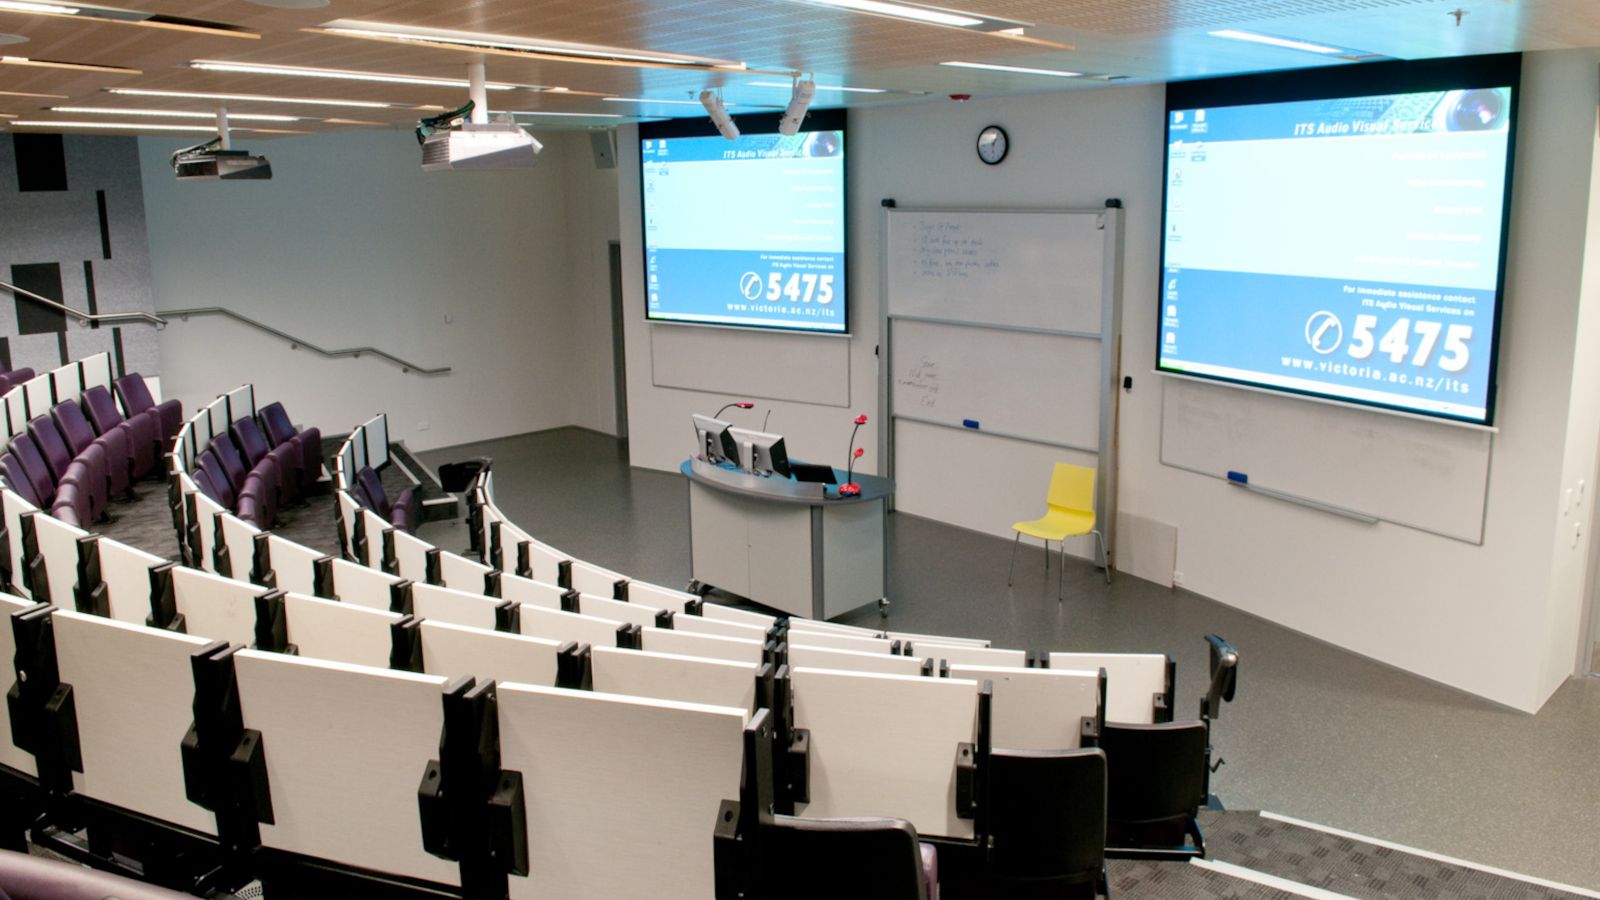 Small lecture theatre from the rear with screens visible at the front